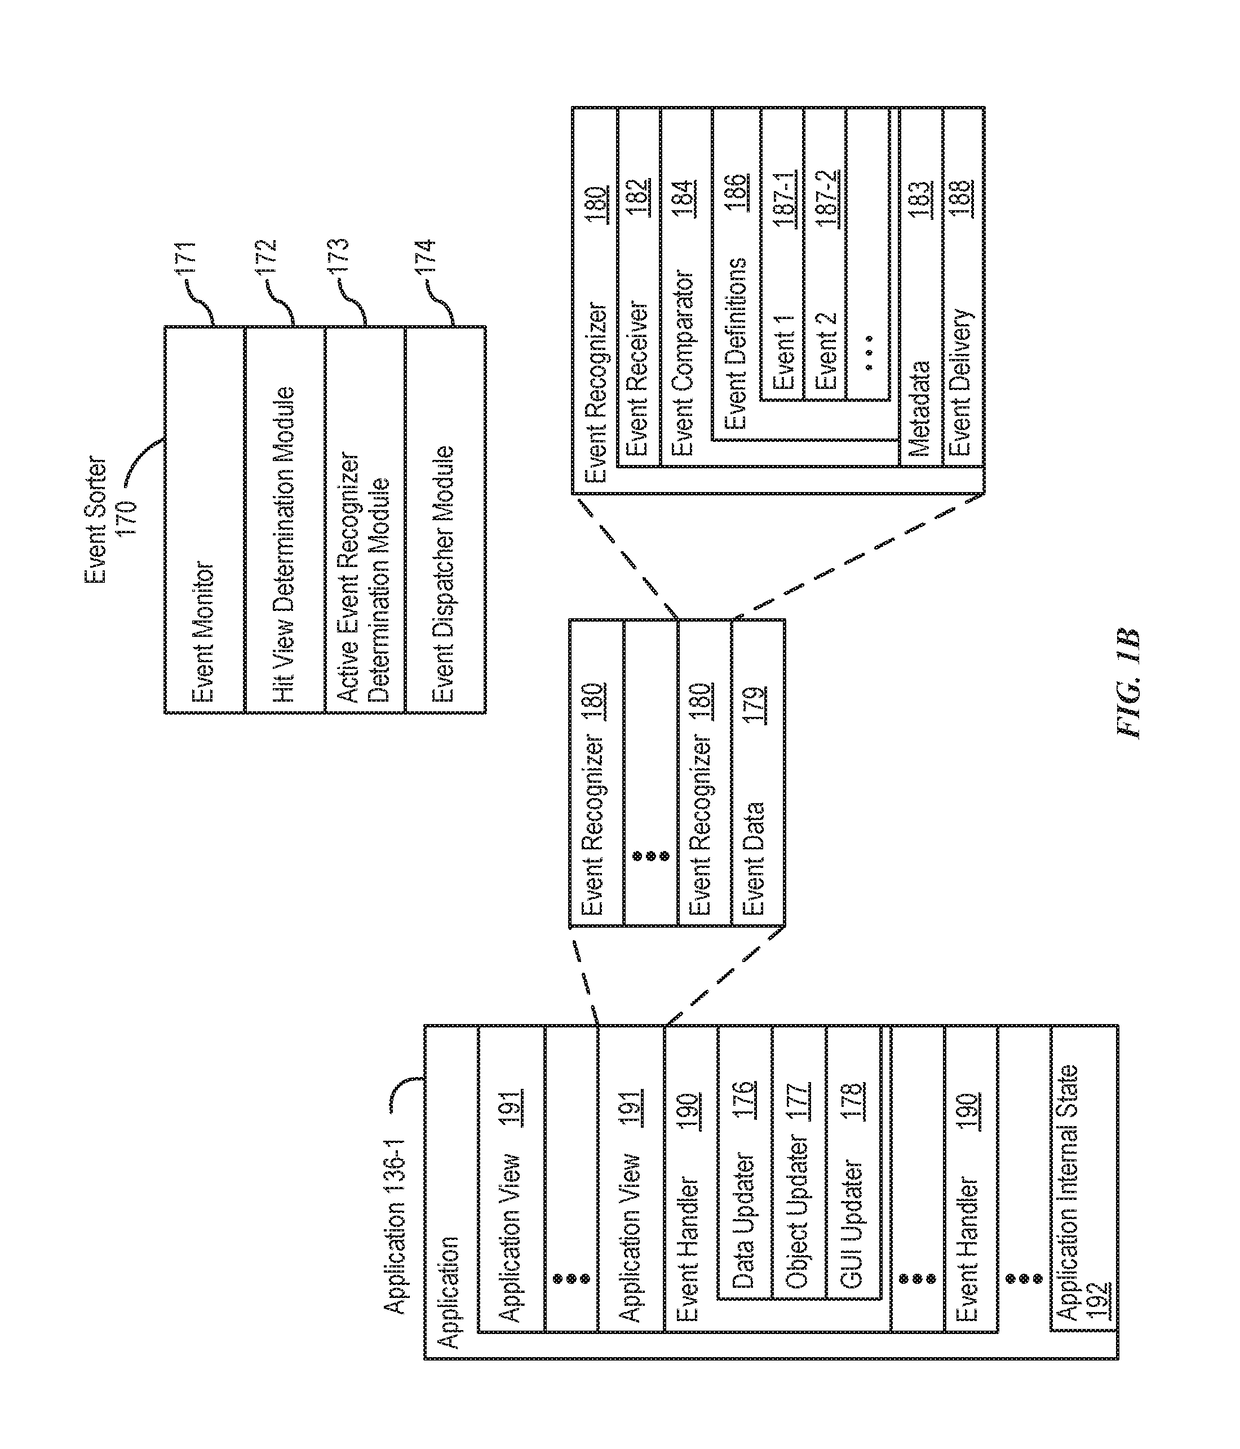 User interface for a device requesting remote authorization